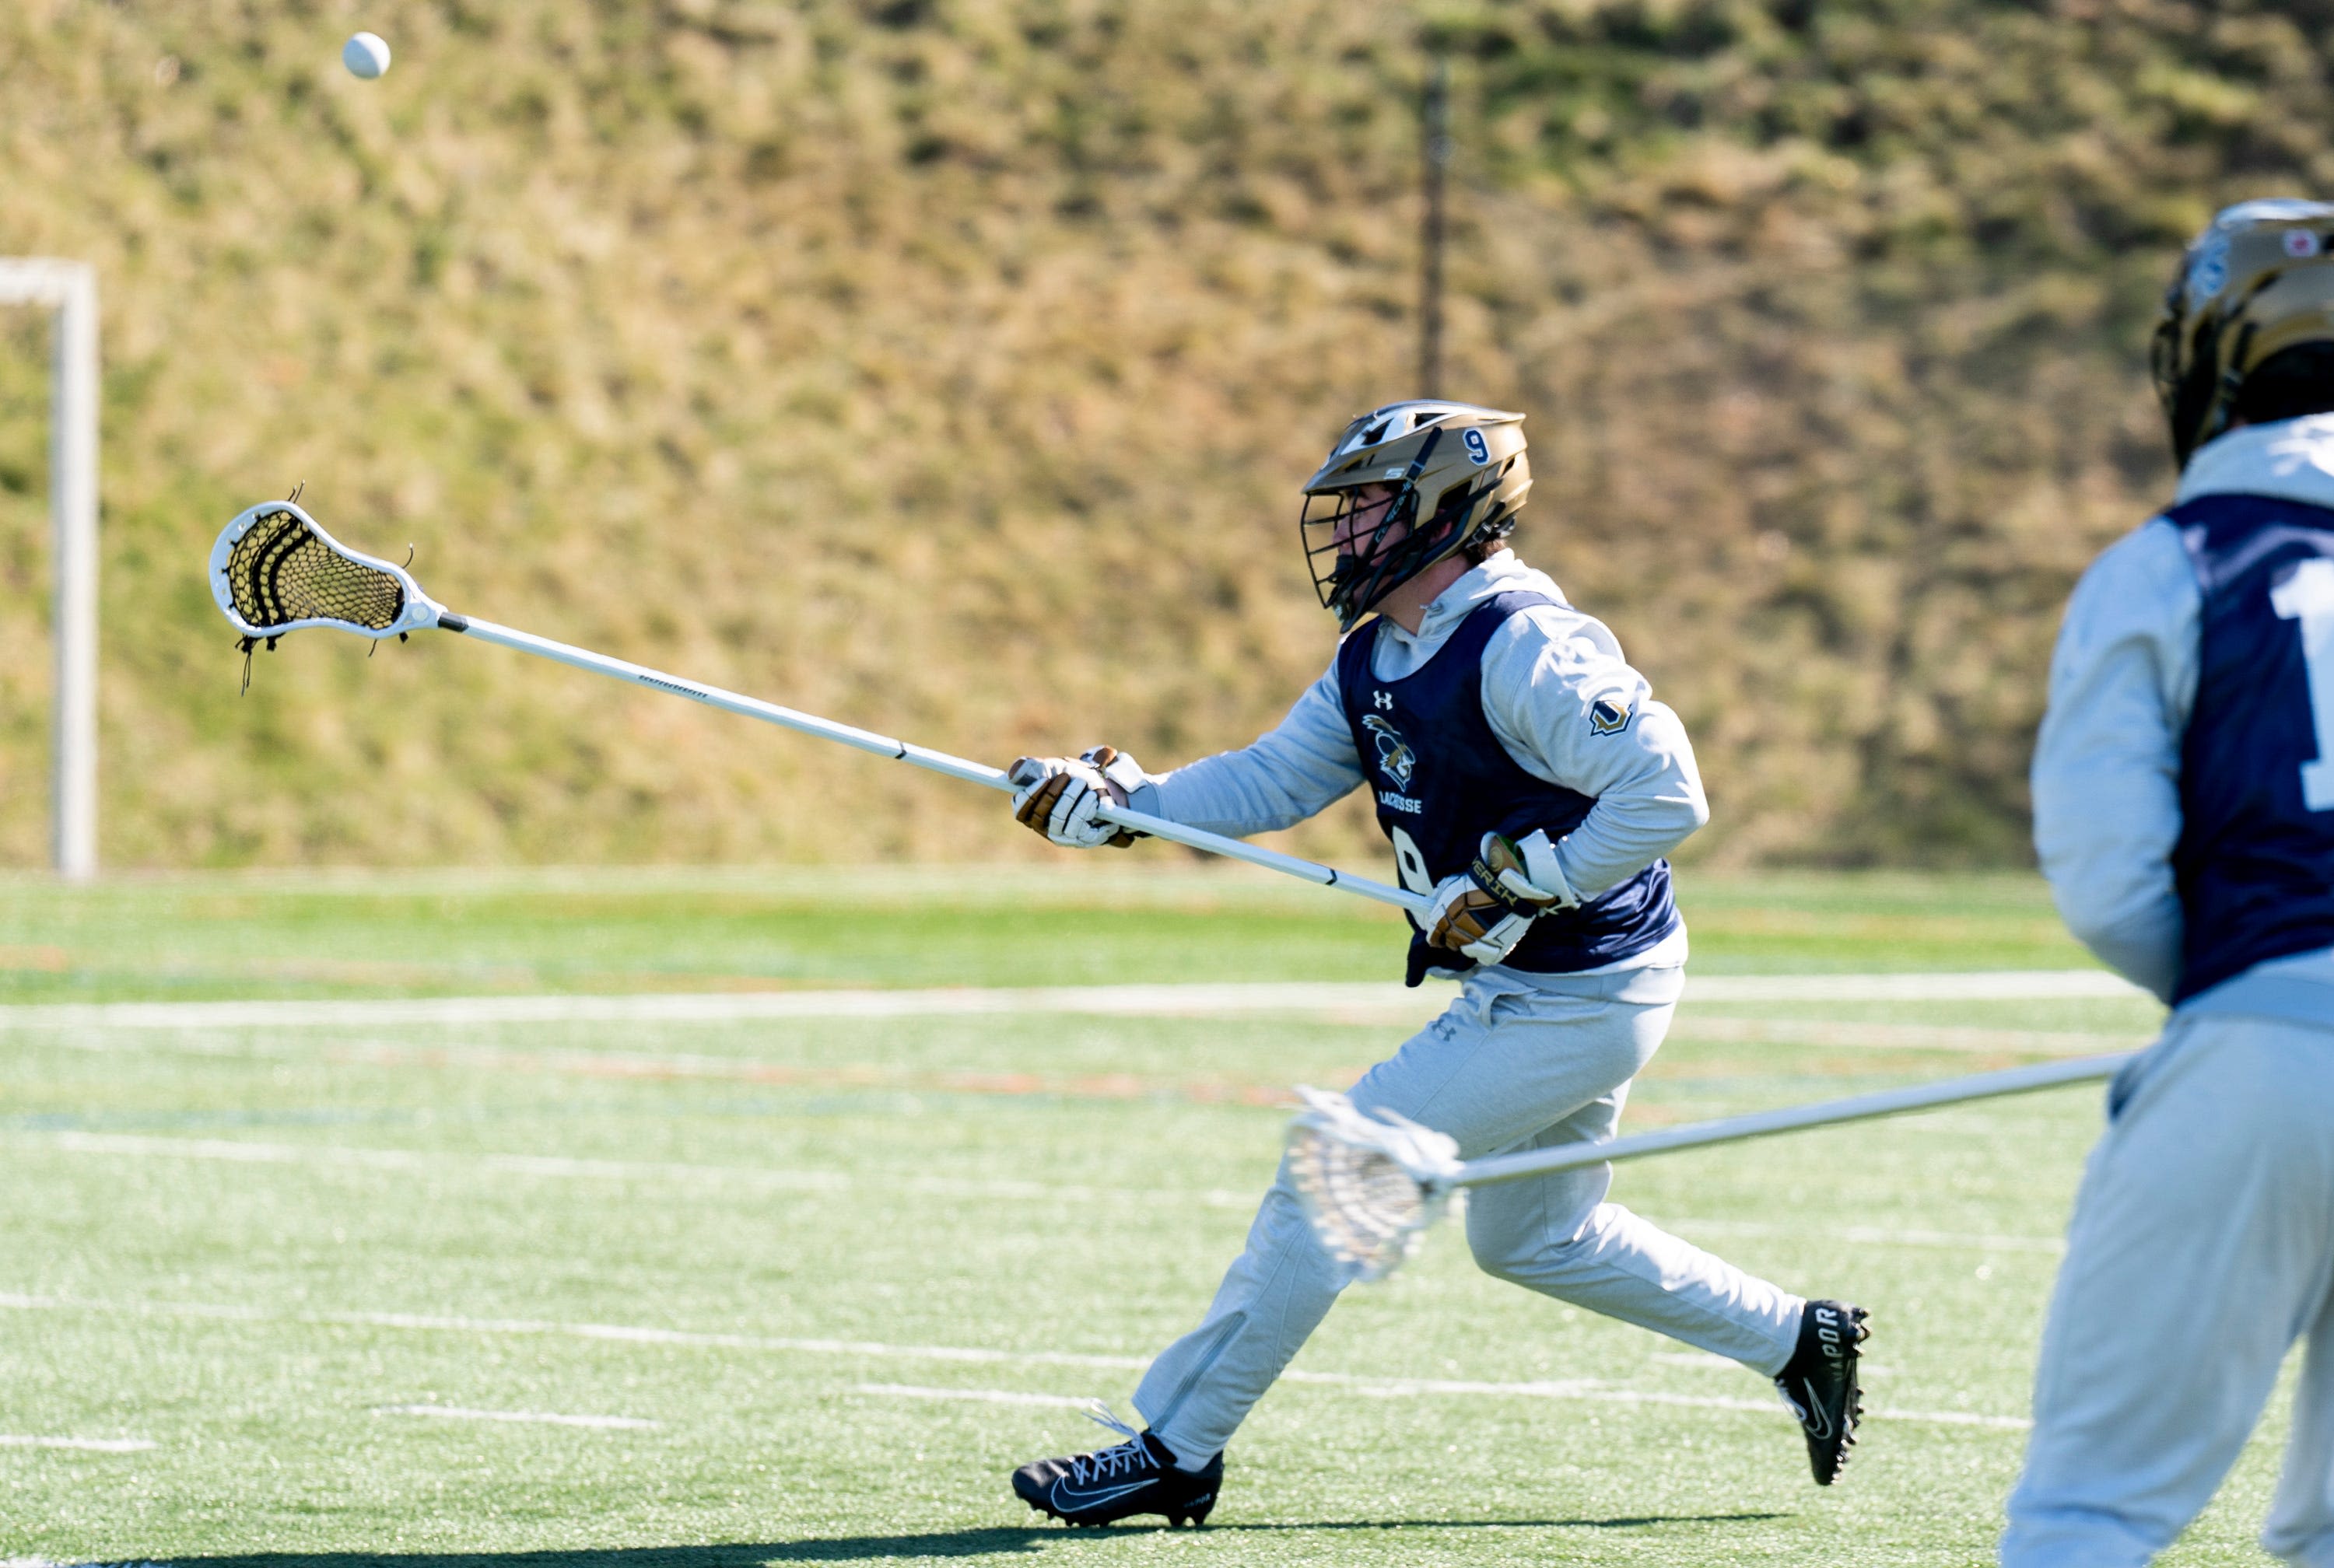 Boys' lacrosse: Status quo at top of Bucks County rankings, but changes aplenty after that